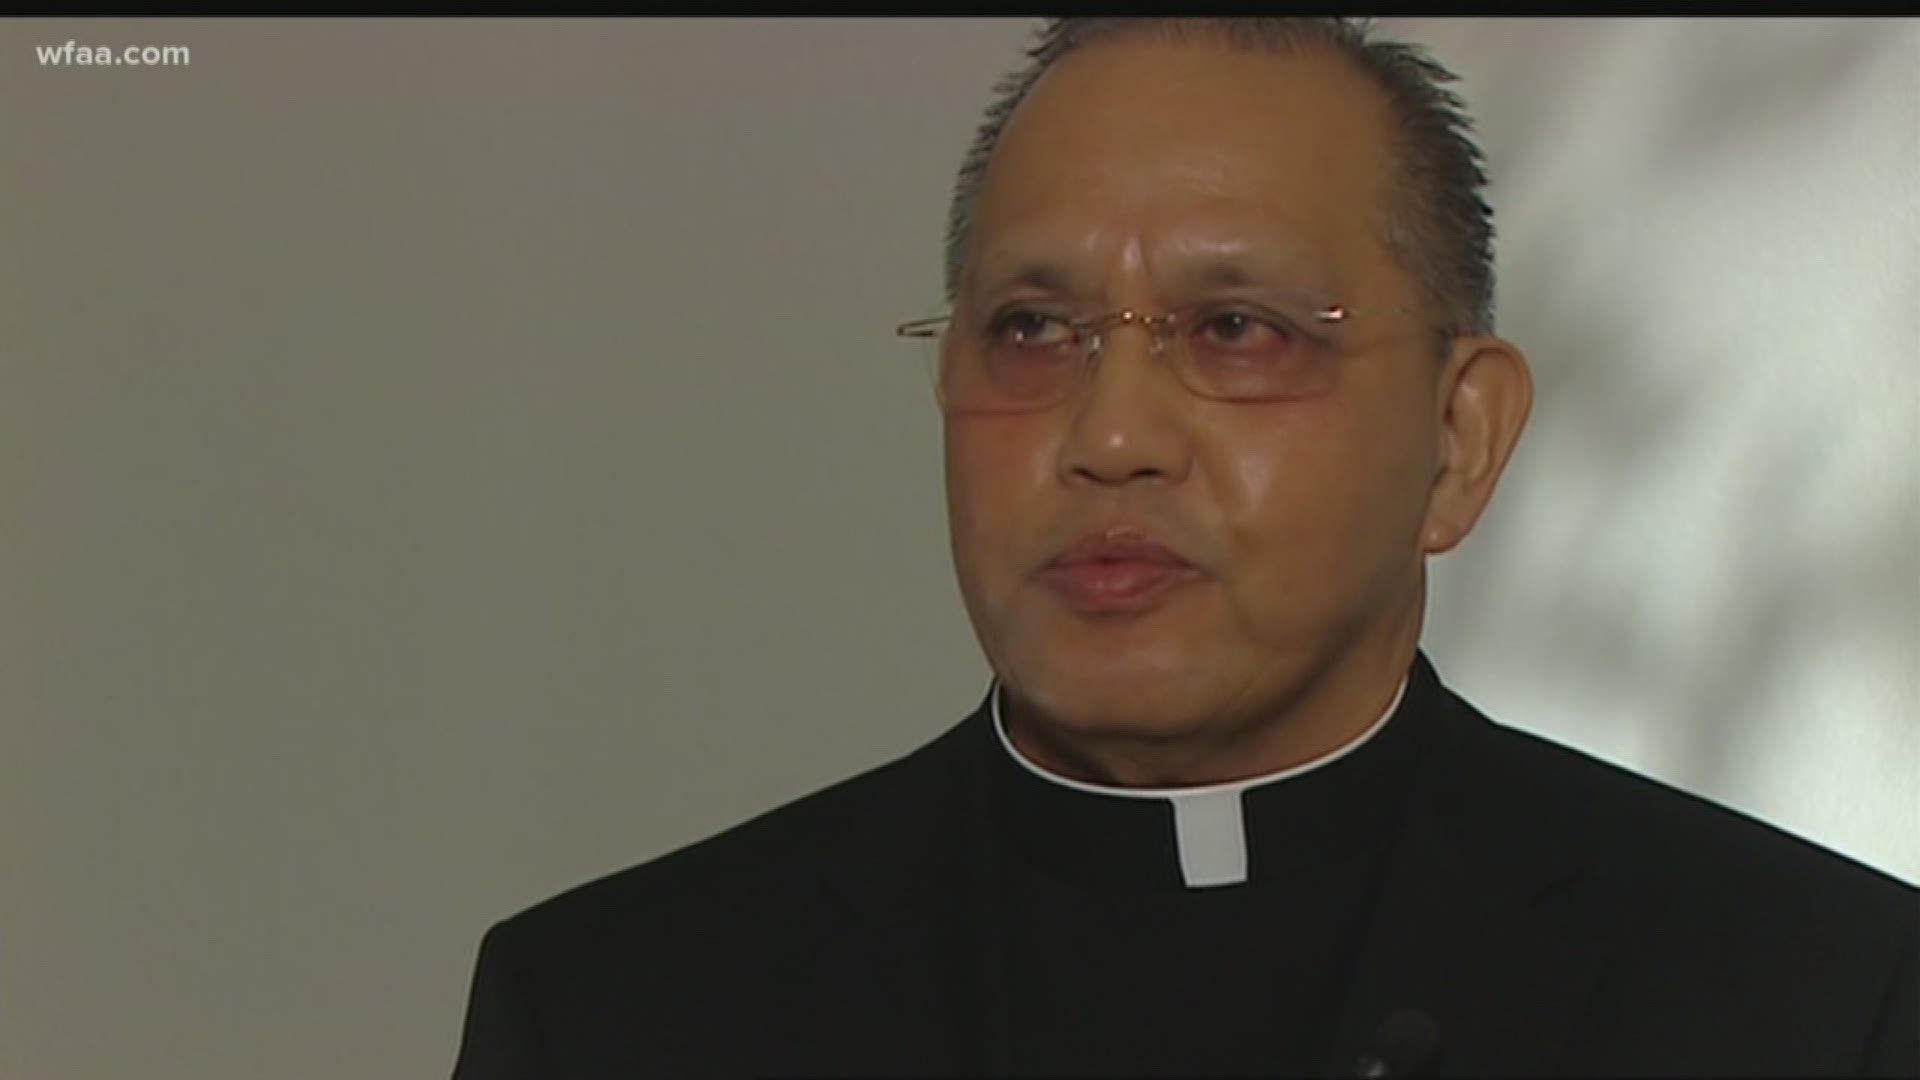 Authorities cannot find Edmundo Paredes, who has been suspended by the Dallas diocese.